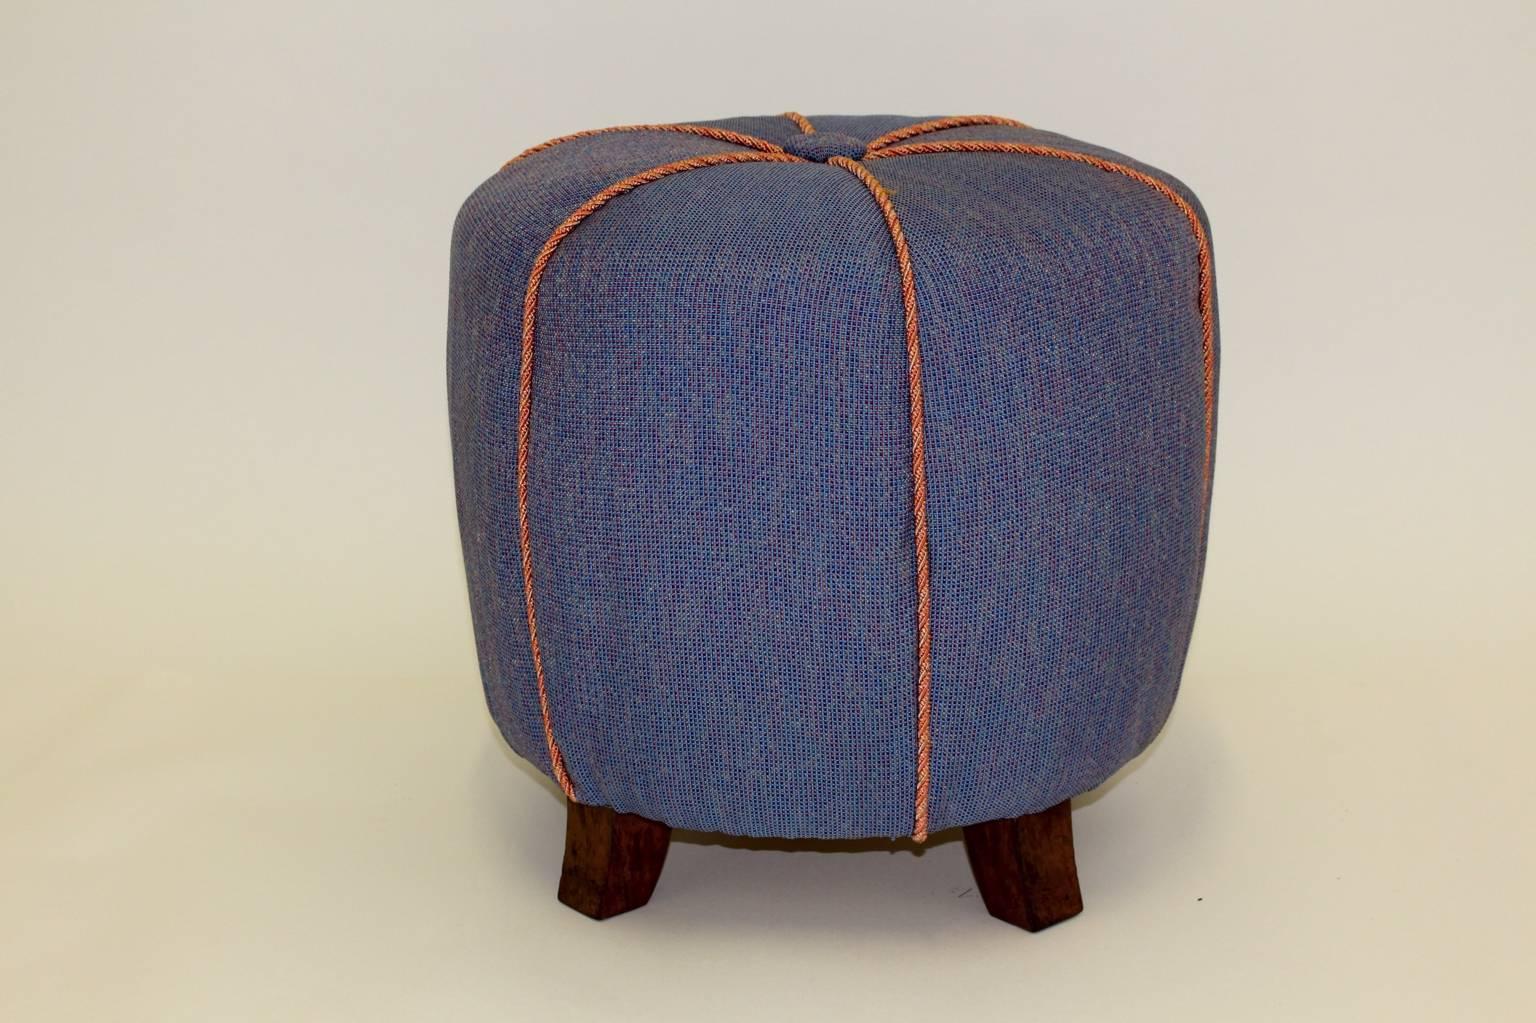 Art Deco vintage blue Pouf or ottoman or stool from blue fabric and beech 1930s Austria.
The stool is reupholstered and covered with a denim blue fabric and pink cords and shows its original shape.
The surface from the beechwood feet are shellac